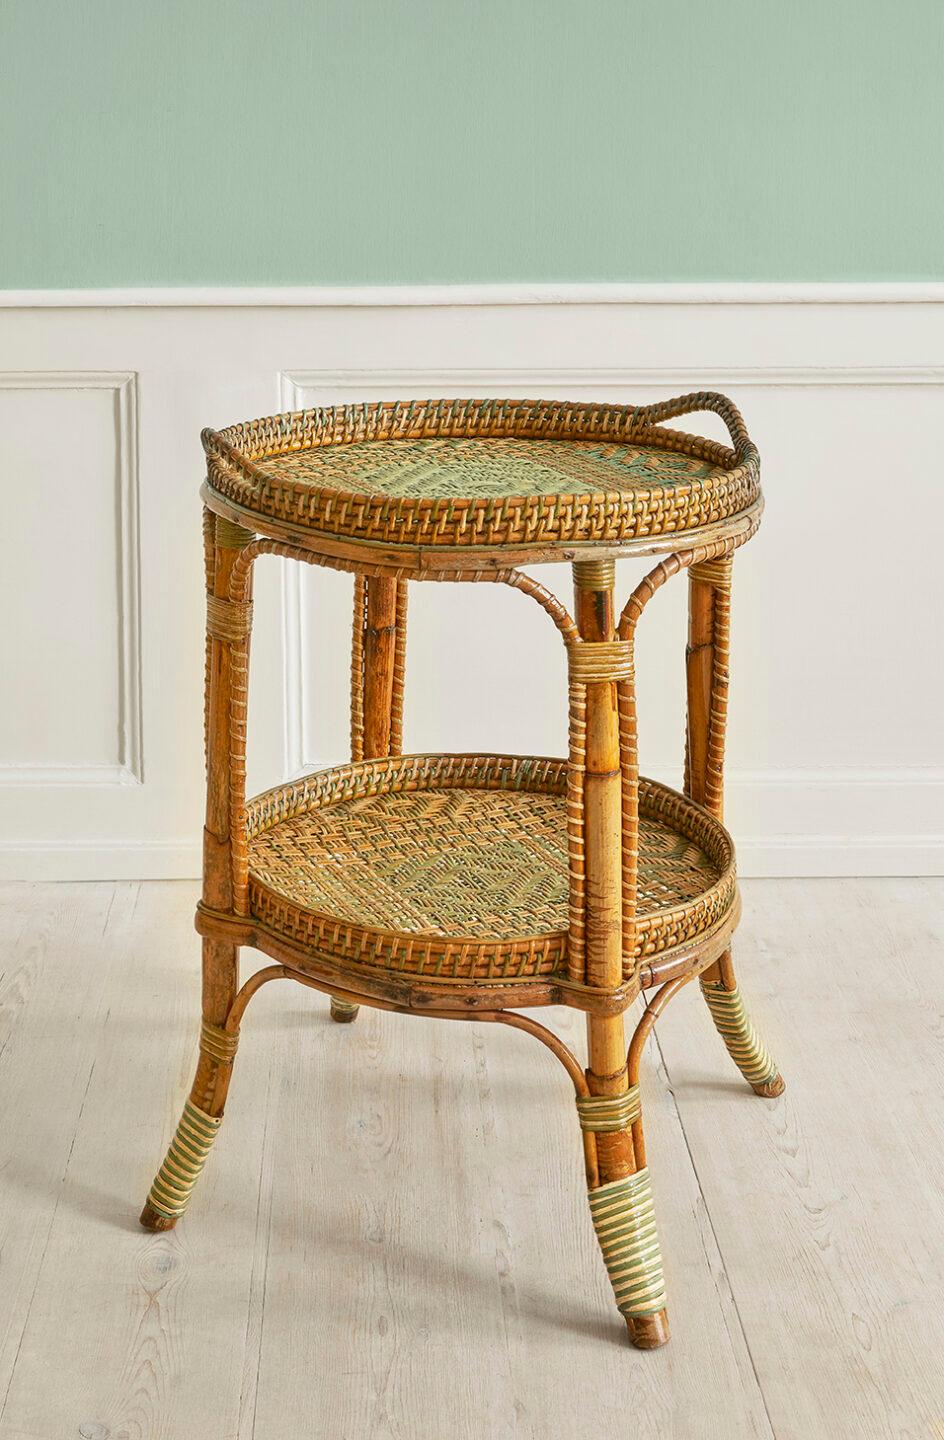 France, 1920s

Rattan tray table with elegant woven details.

Measures: H 72 x Ø 54 cm.